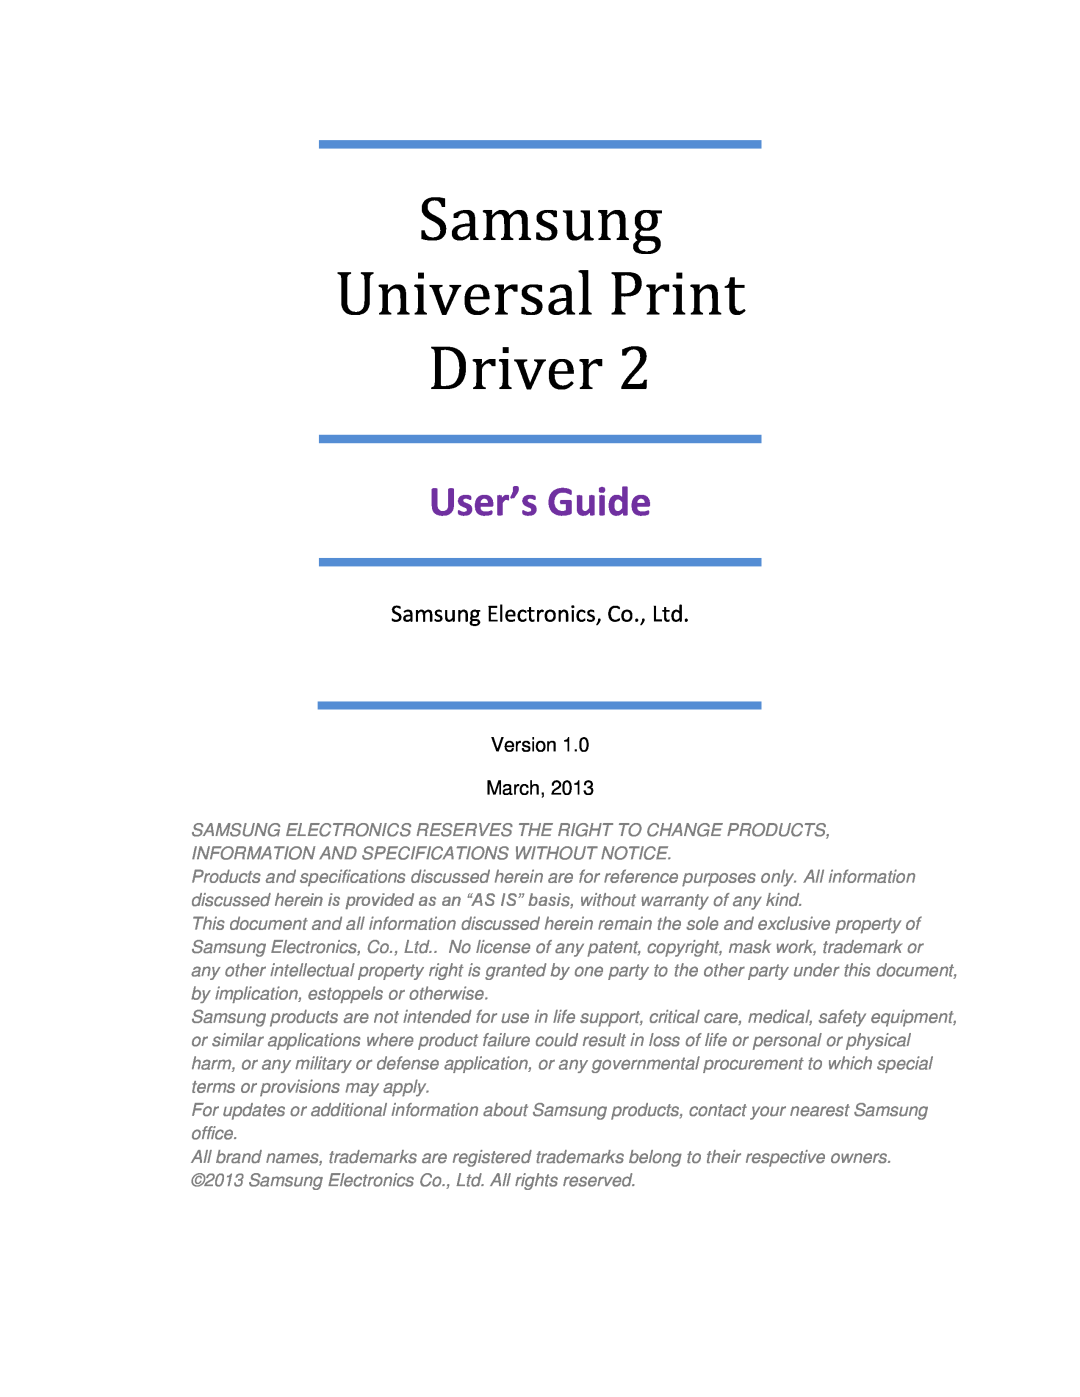 Samsung SLM3870FW, ML2165WXAA, SCX4729FD specifications Version March, Samsung Universal Print Driver, User’s Guide 